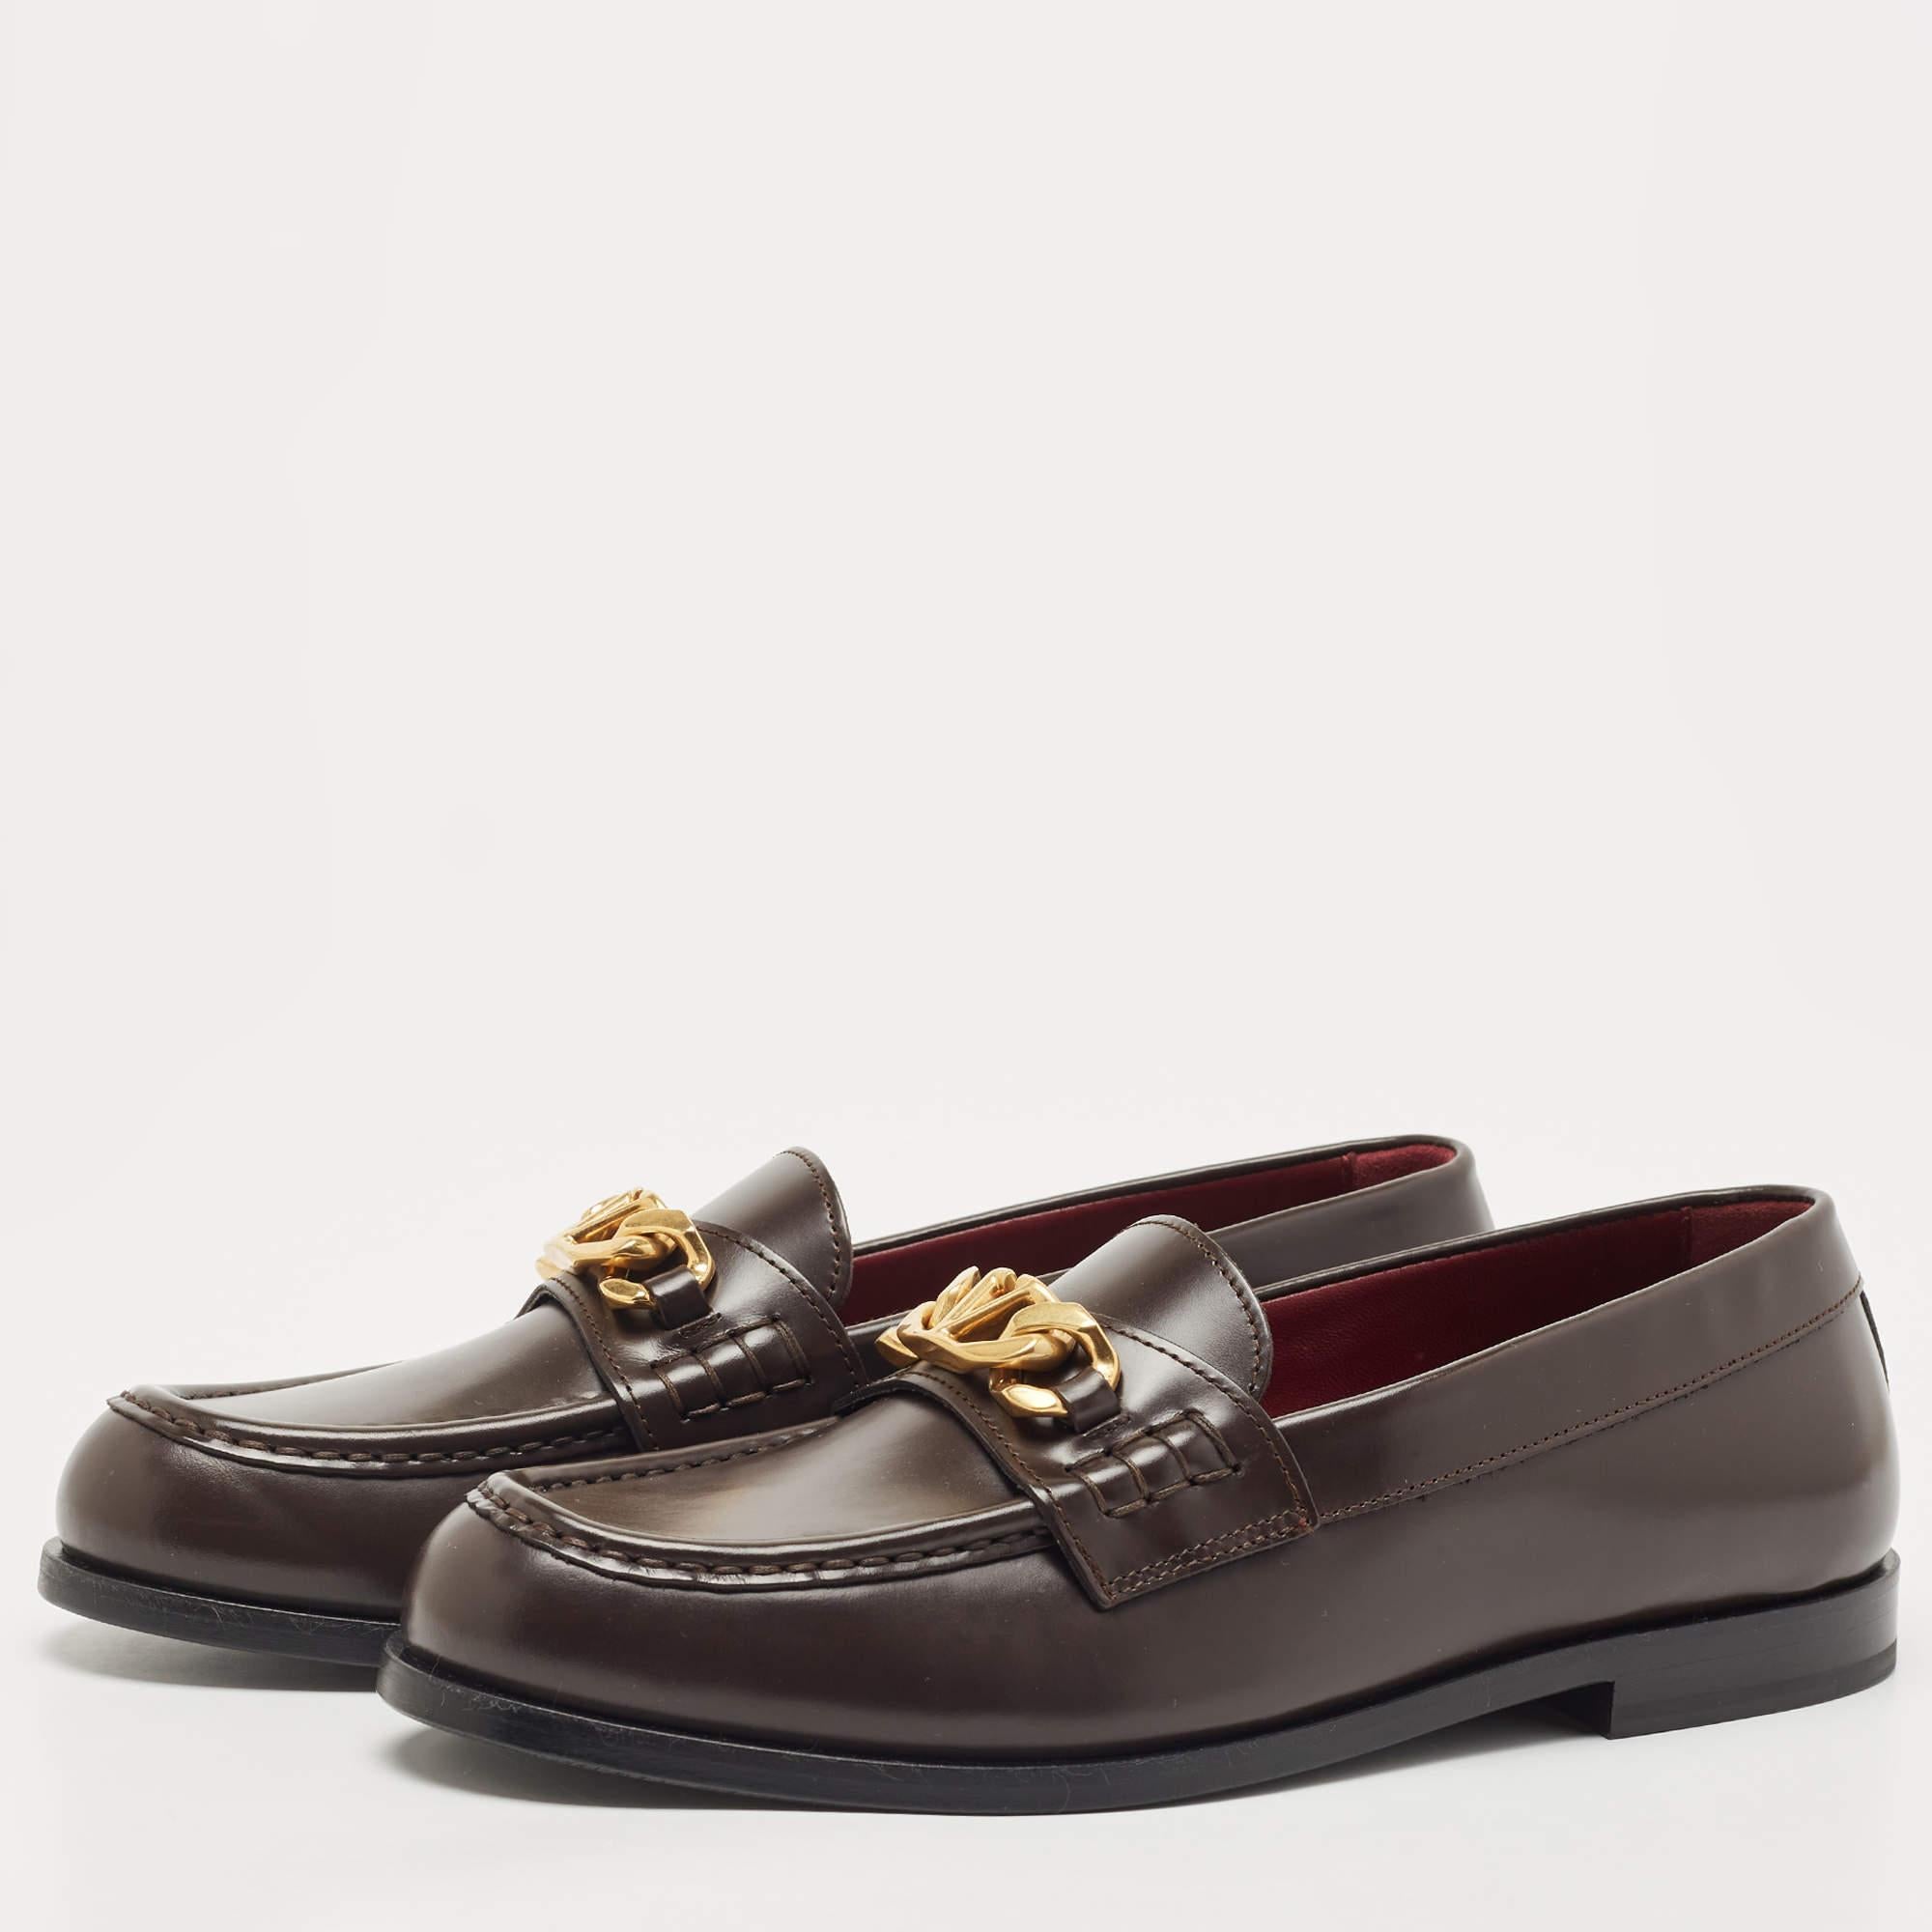 Purposely created to exude style and provide comfort wherever you go, this pair of loafers by Valentino is absolutely worth buying! The shoes have been expertly crafted from leather, styled with the VLogo accent, and finished with rubber